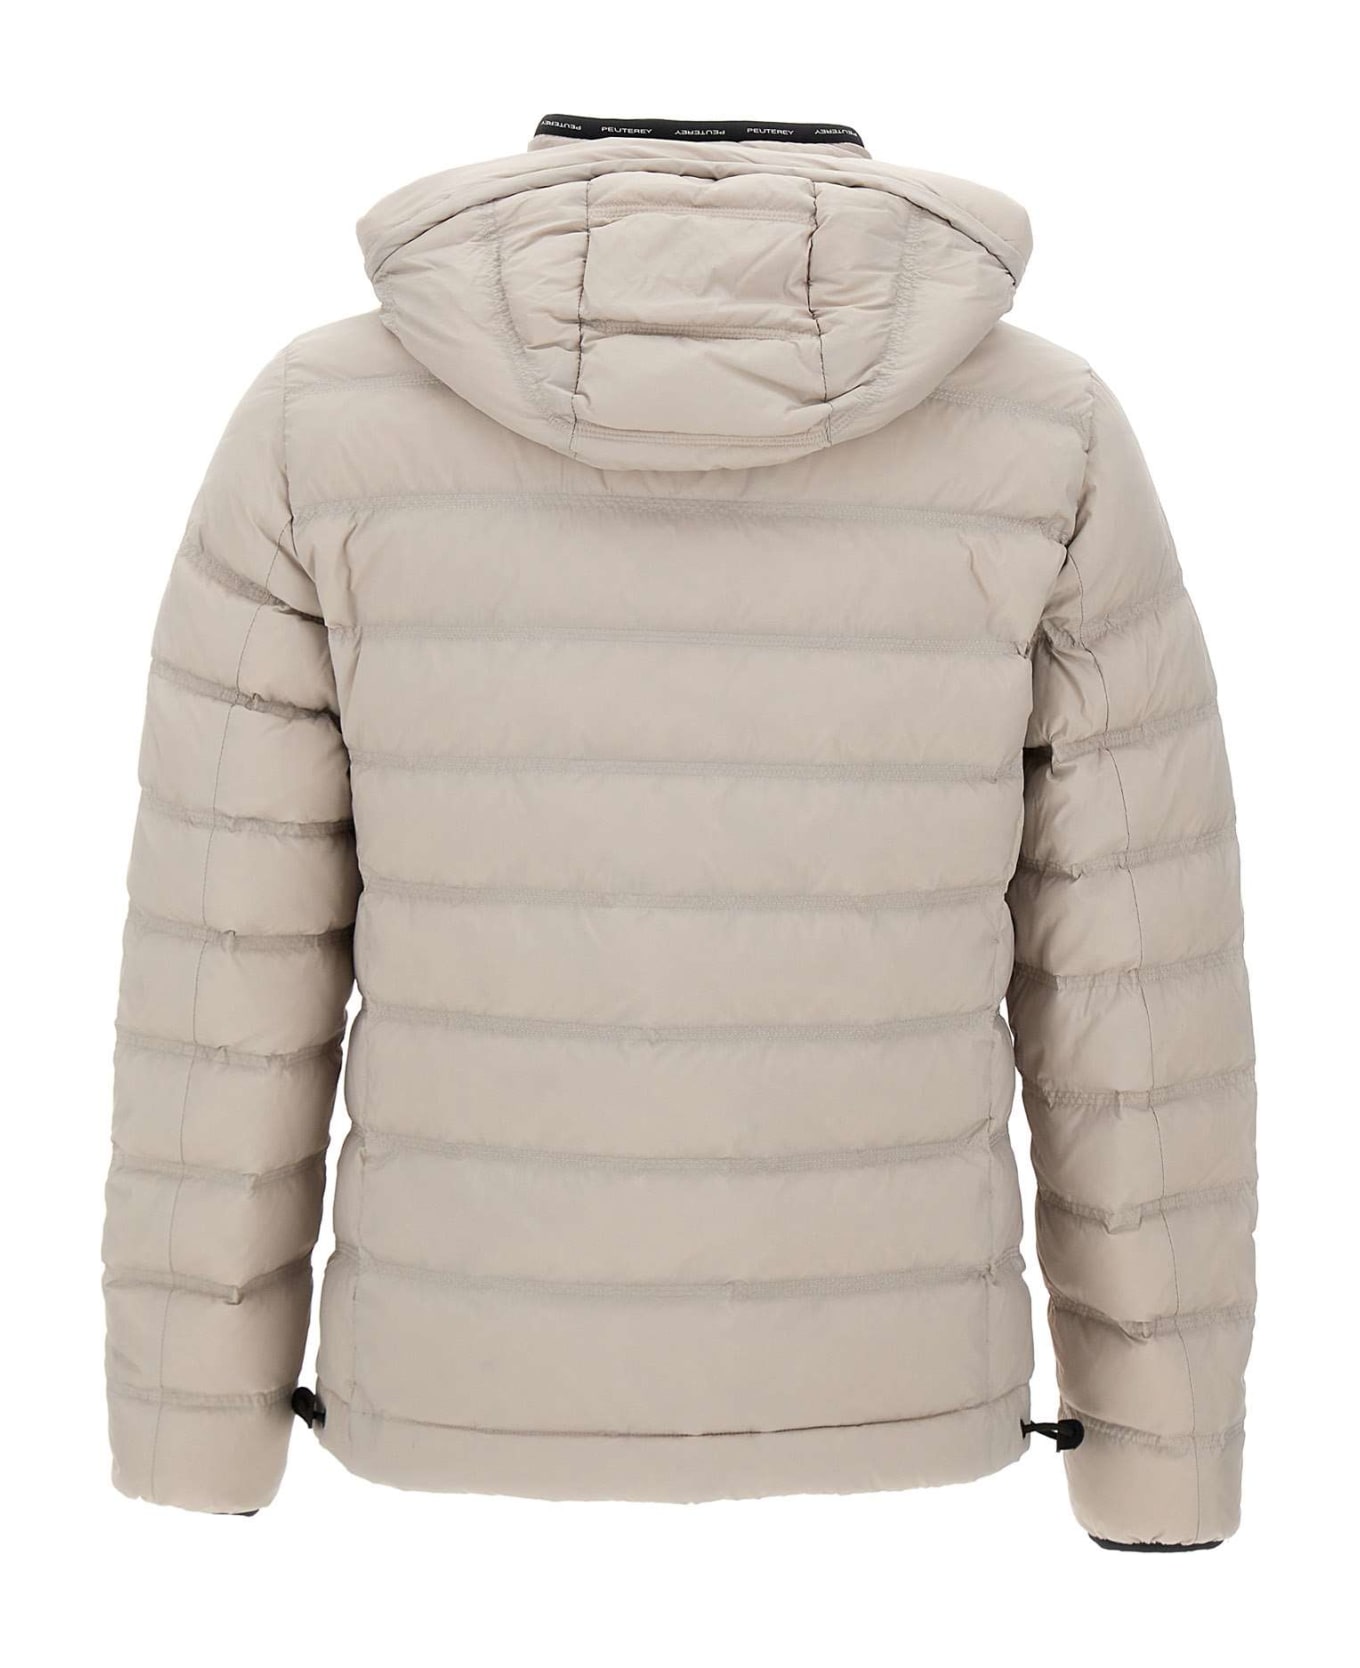 Peuterey 'boggs Kn' Down Jacket - Ice